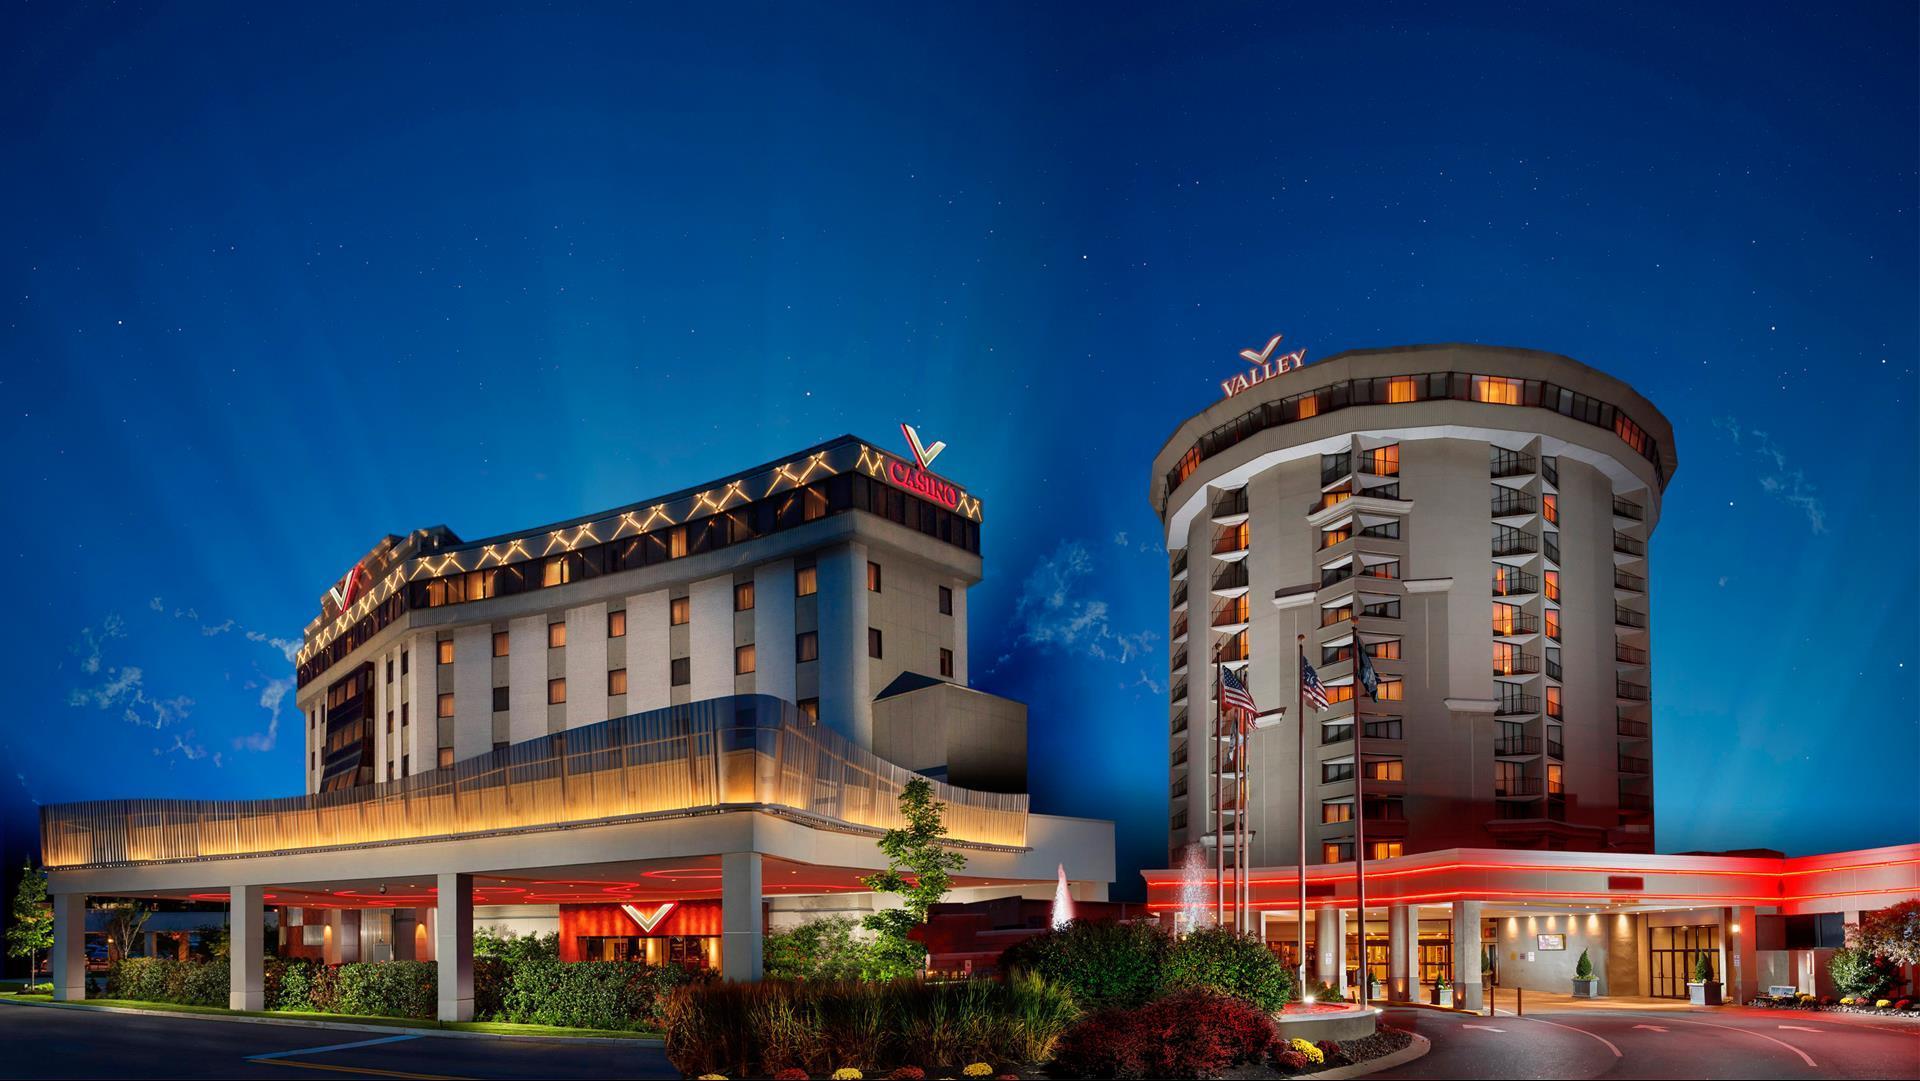 Valley Forge Casino Resort in King of Prussia, PA